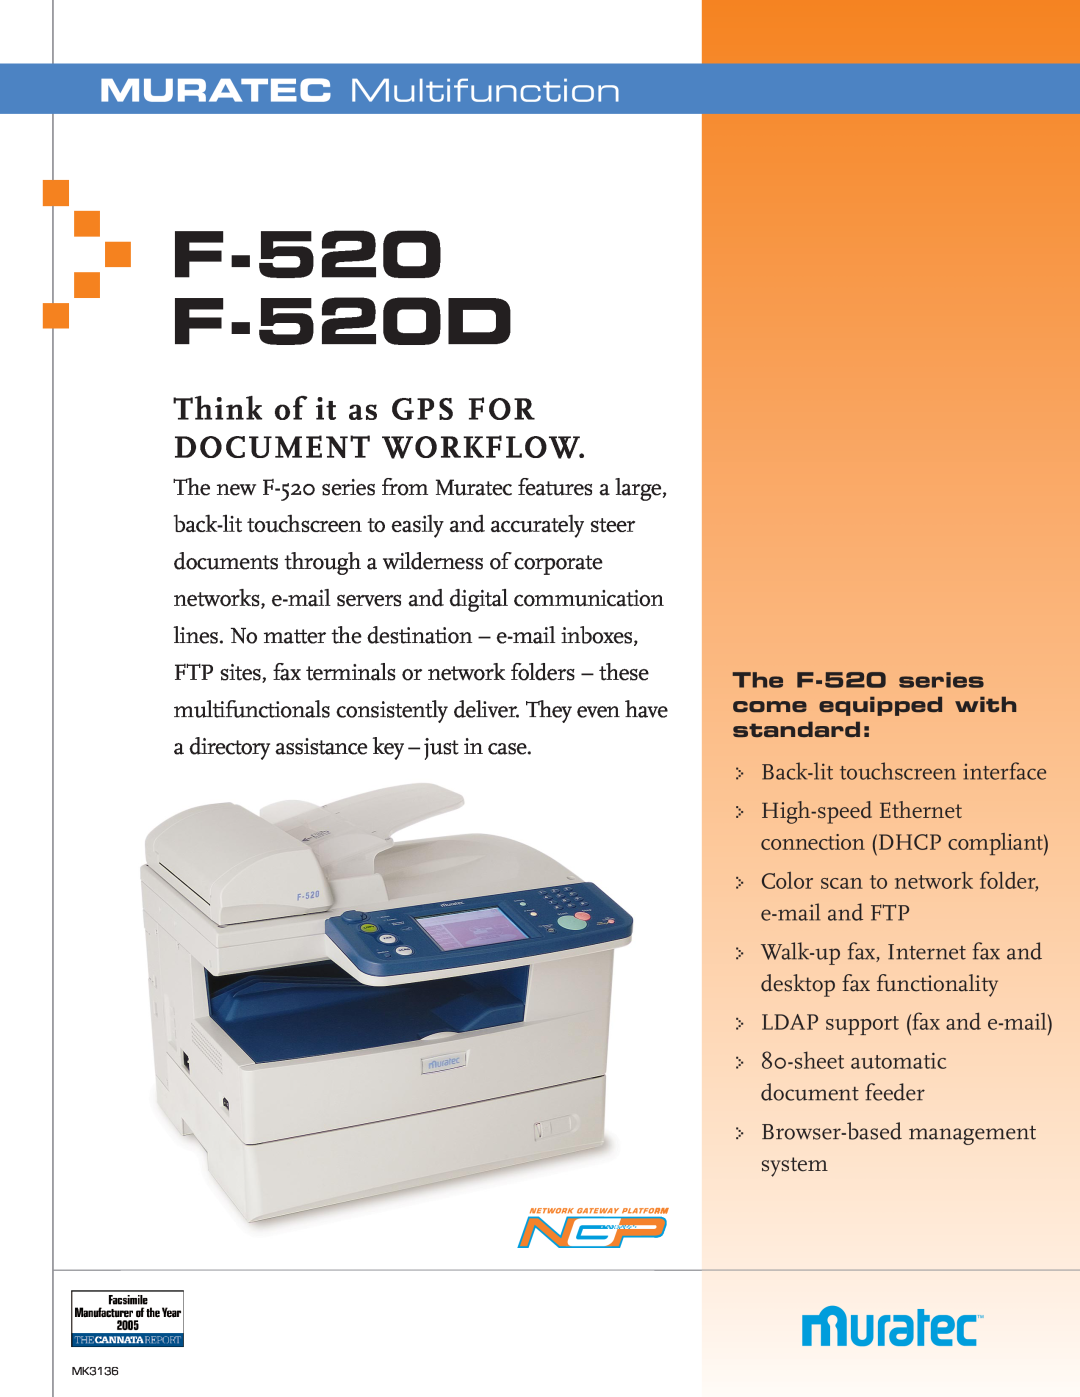 Muratec F-520D manual MURATEC Multifunction, FF--520520D, Think of it as GPS FOR DOCUMENT WORKFLOW 